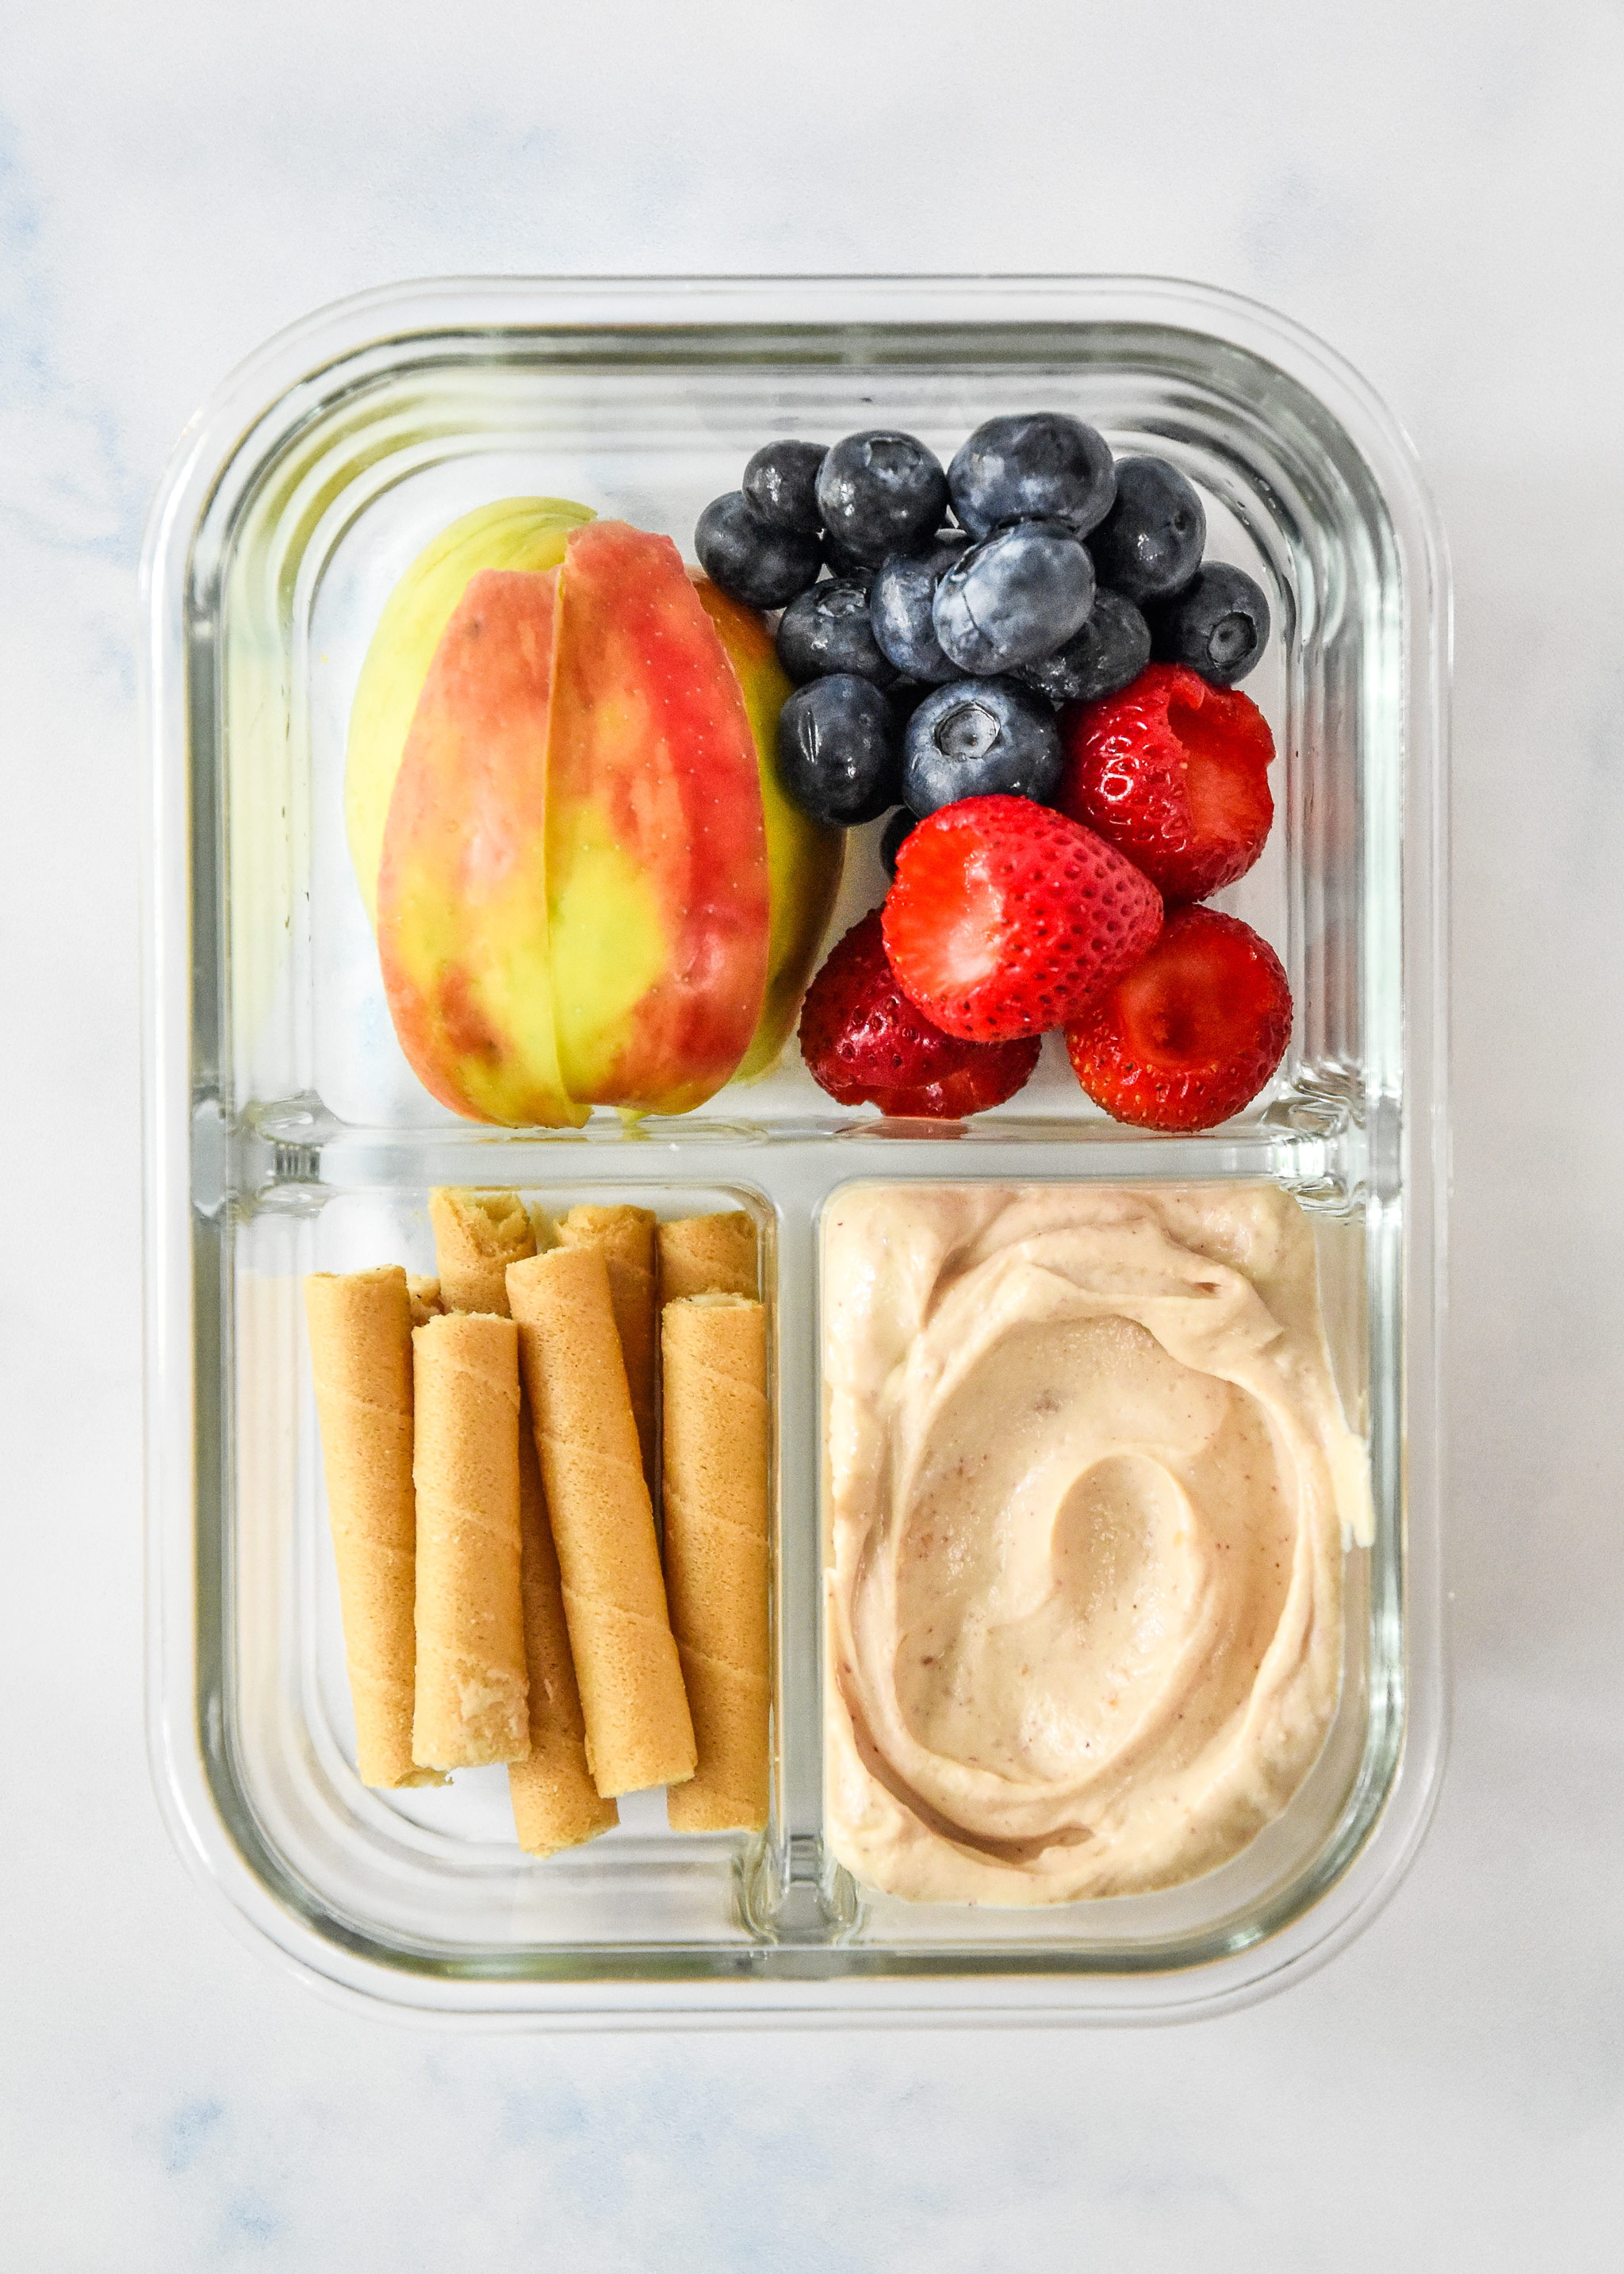 peanut butter fruit dip yogurt snack box with apple slices, berries and dip.